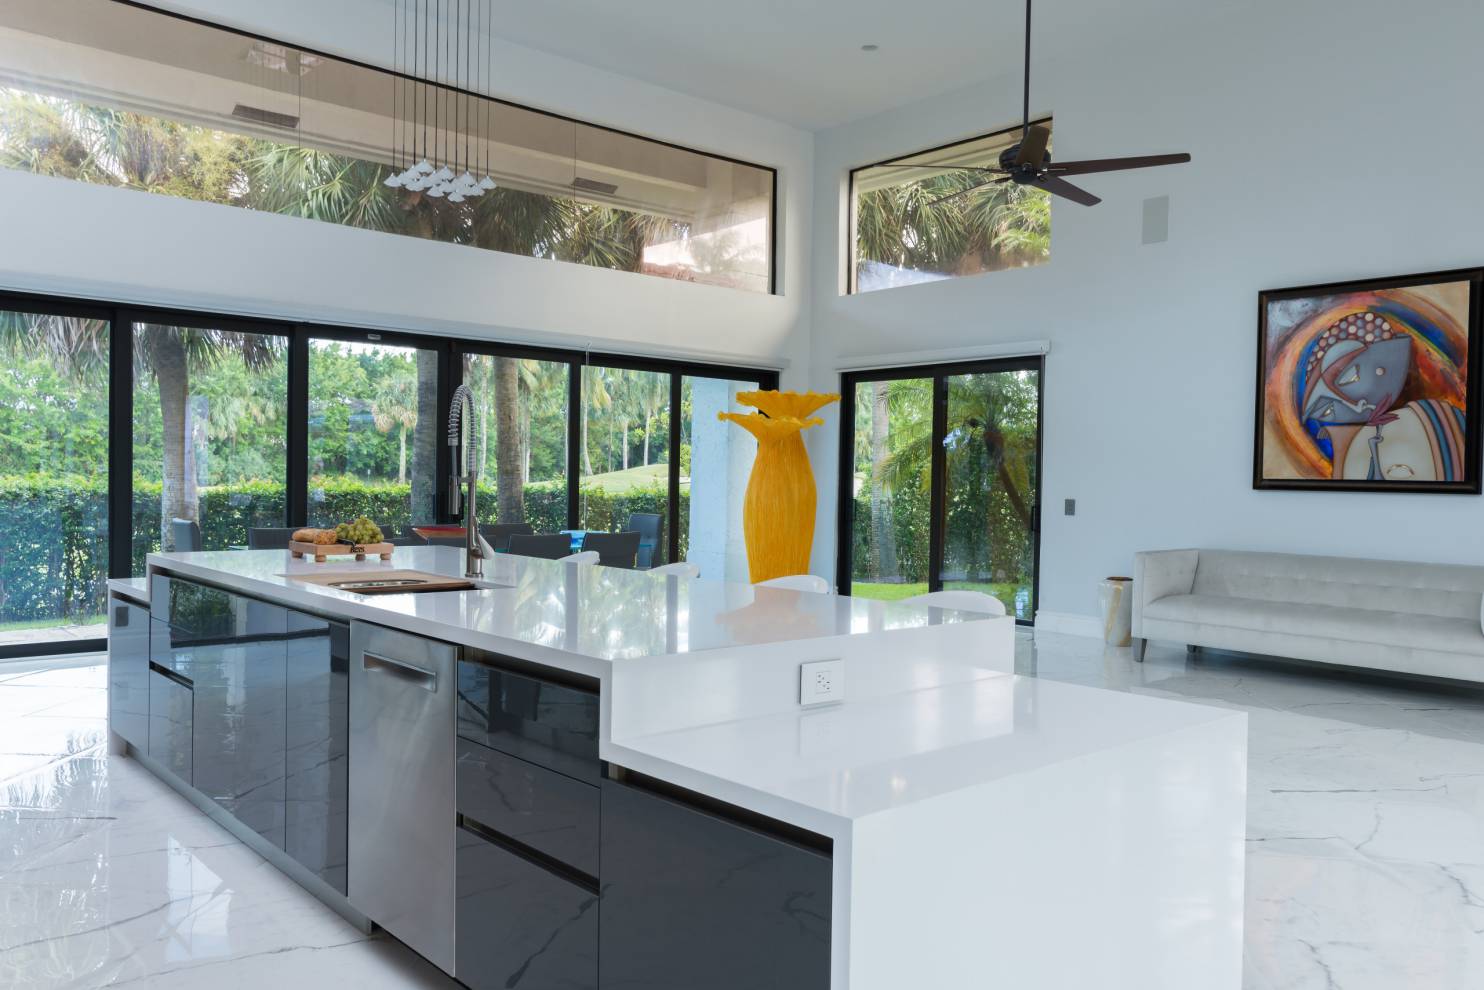 Contemporary Kitchen Remodel Miami Fl Allied Kitchen Bath Home And Outdoor Living Img 72d162090877f8e7 14 8557 1 4073cdb